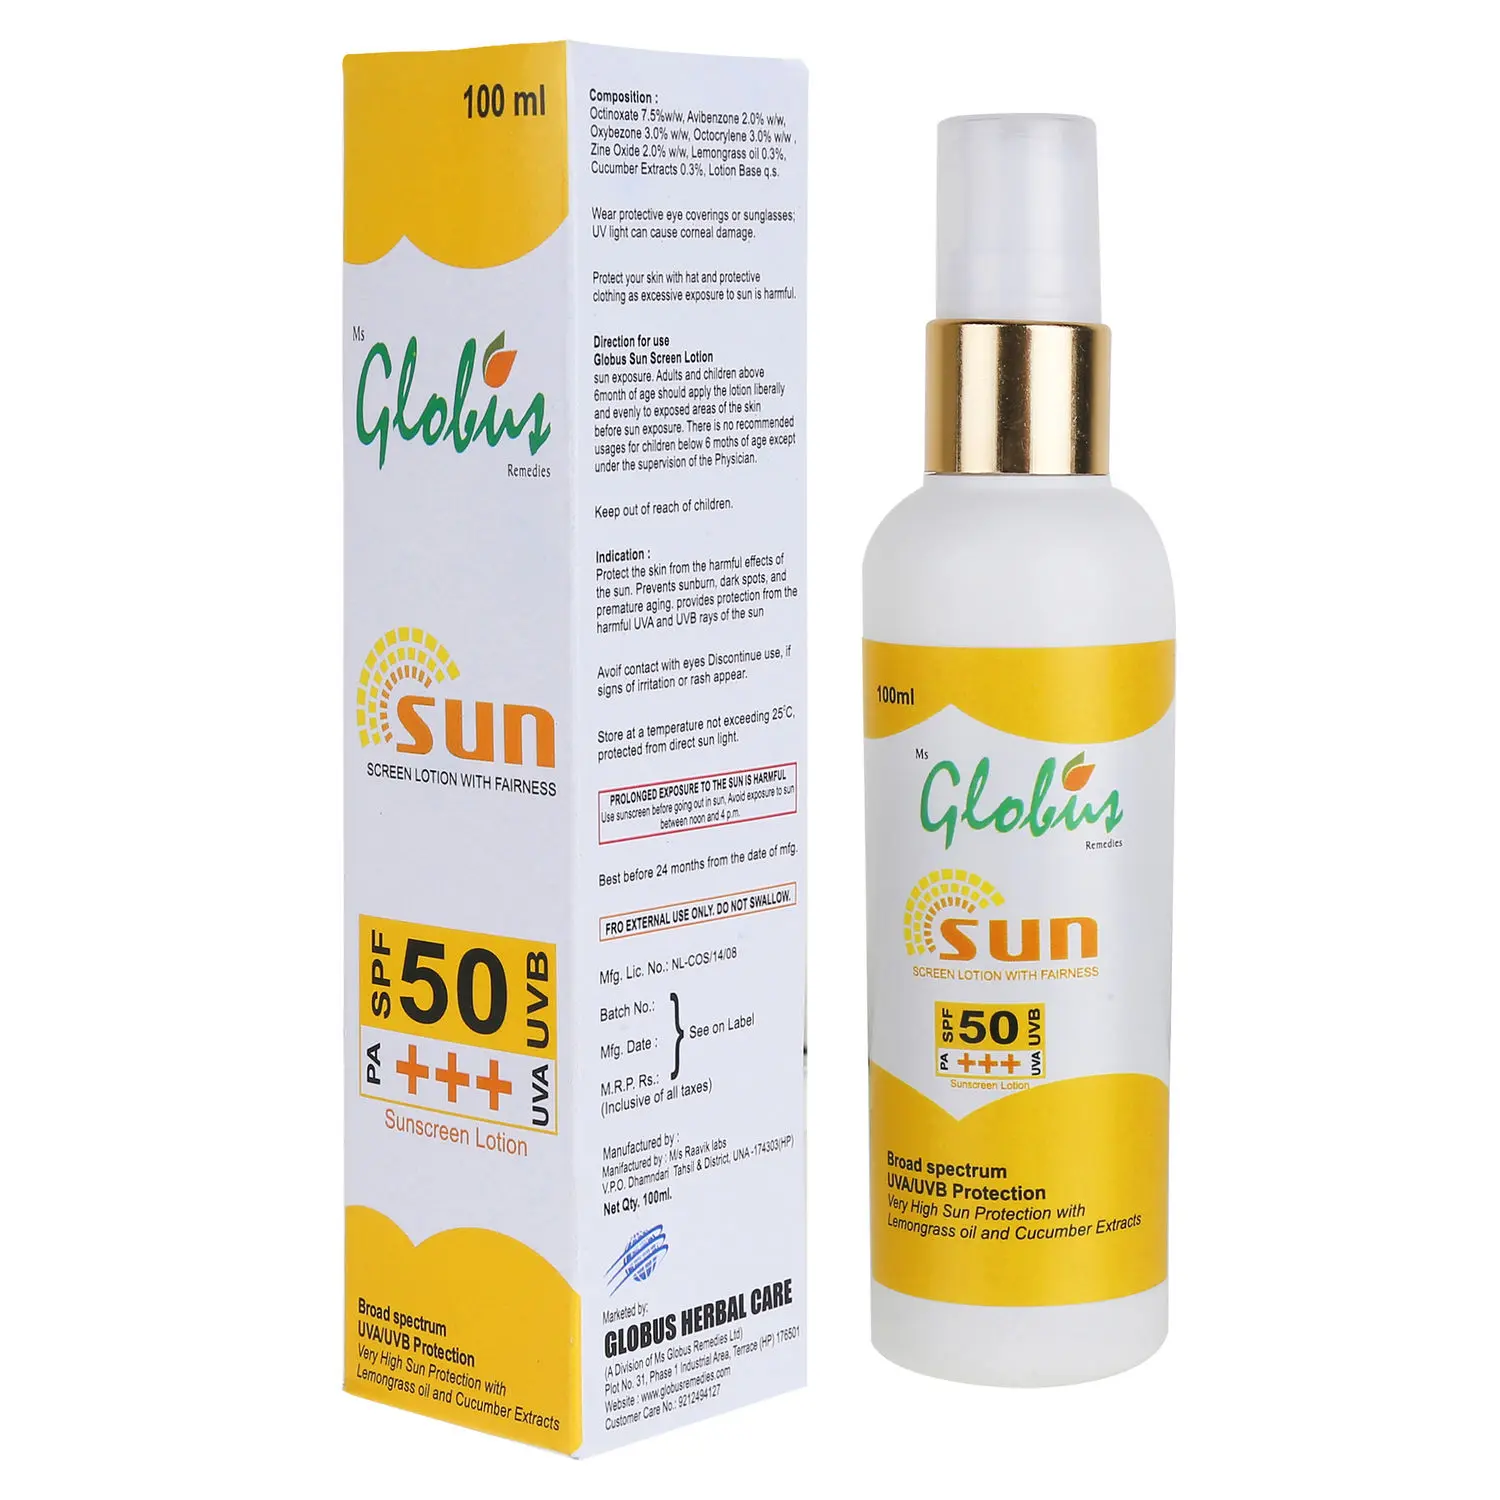 Globus Remedies Sunscreen Lotion With Fairness - Spf 50 Pa+++ (100 ml)